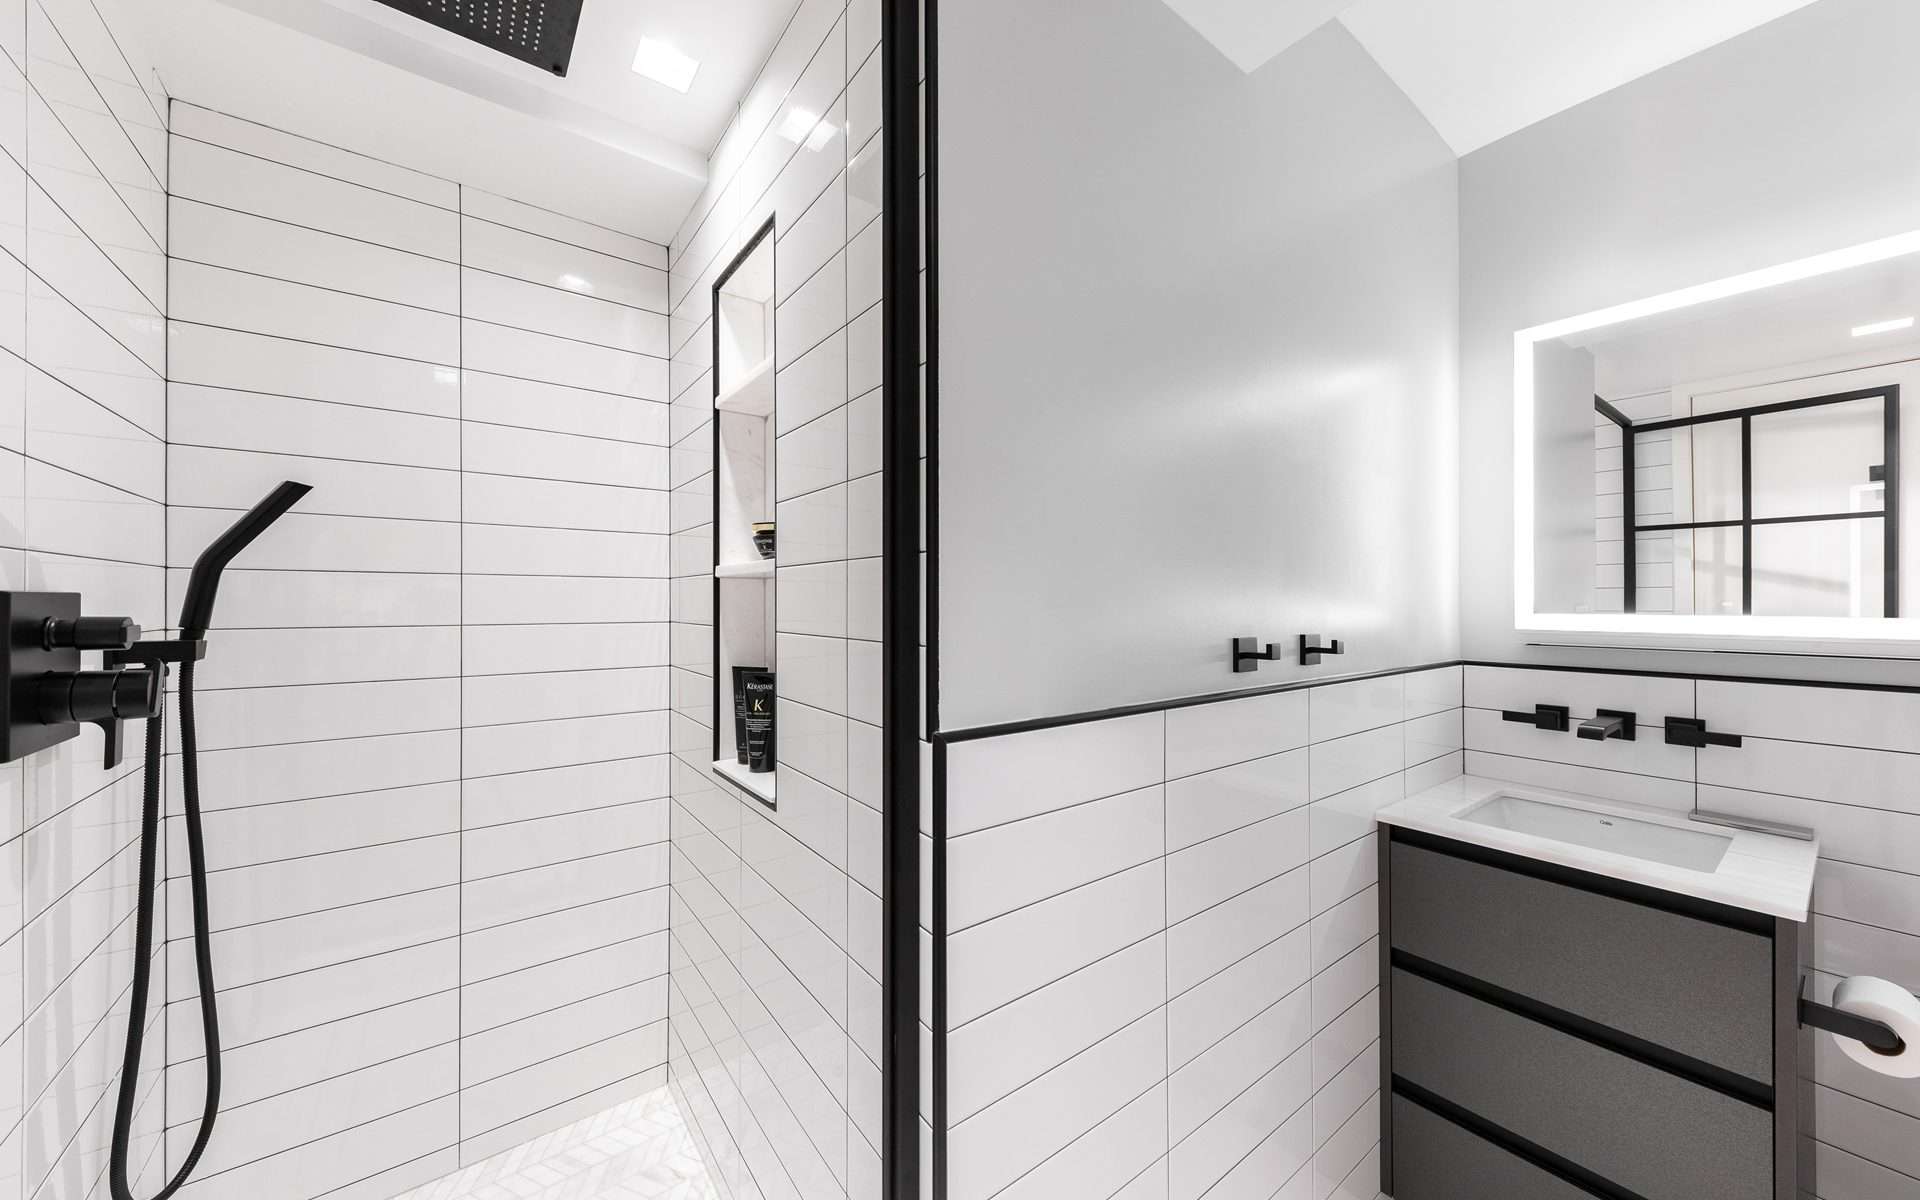 Statement-making bathroom features white subway tiles, black cabinetry and accents and modern appliances.